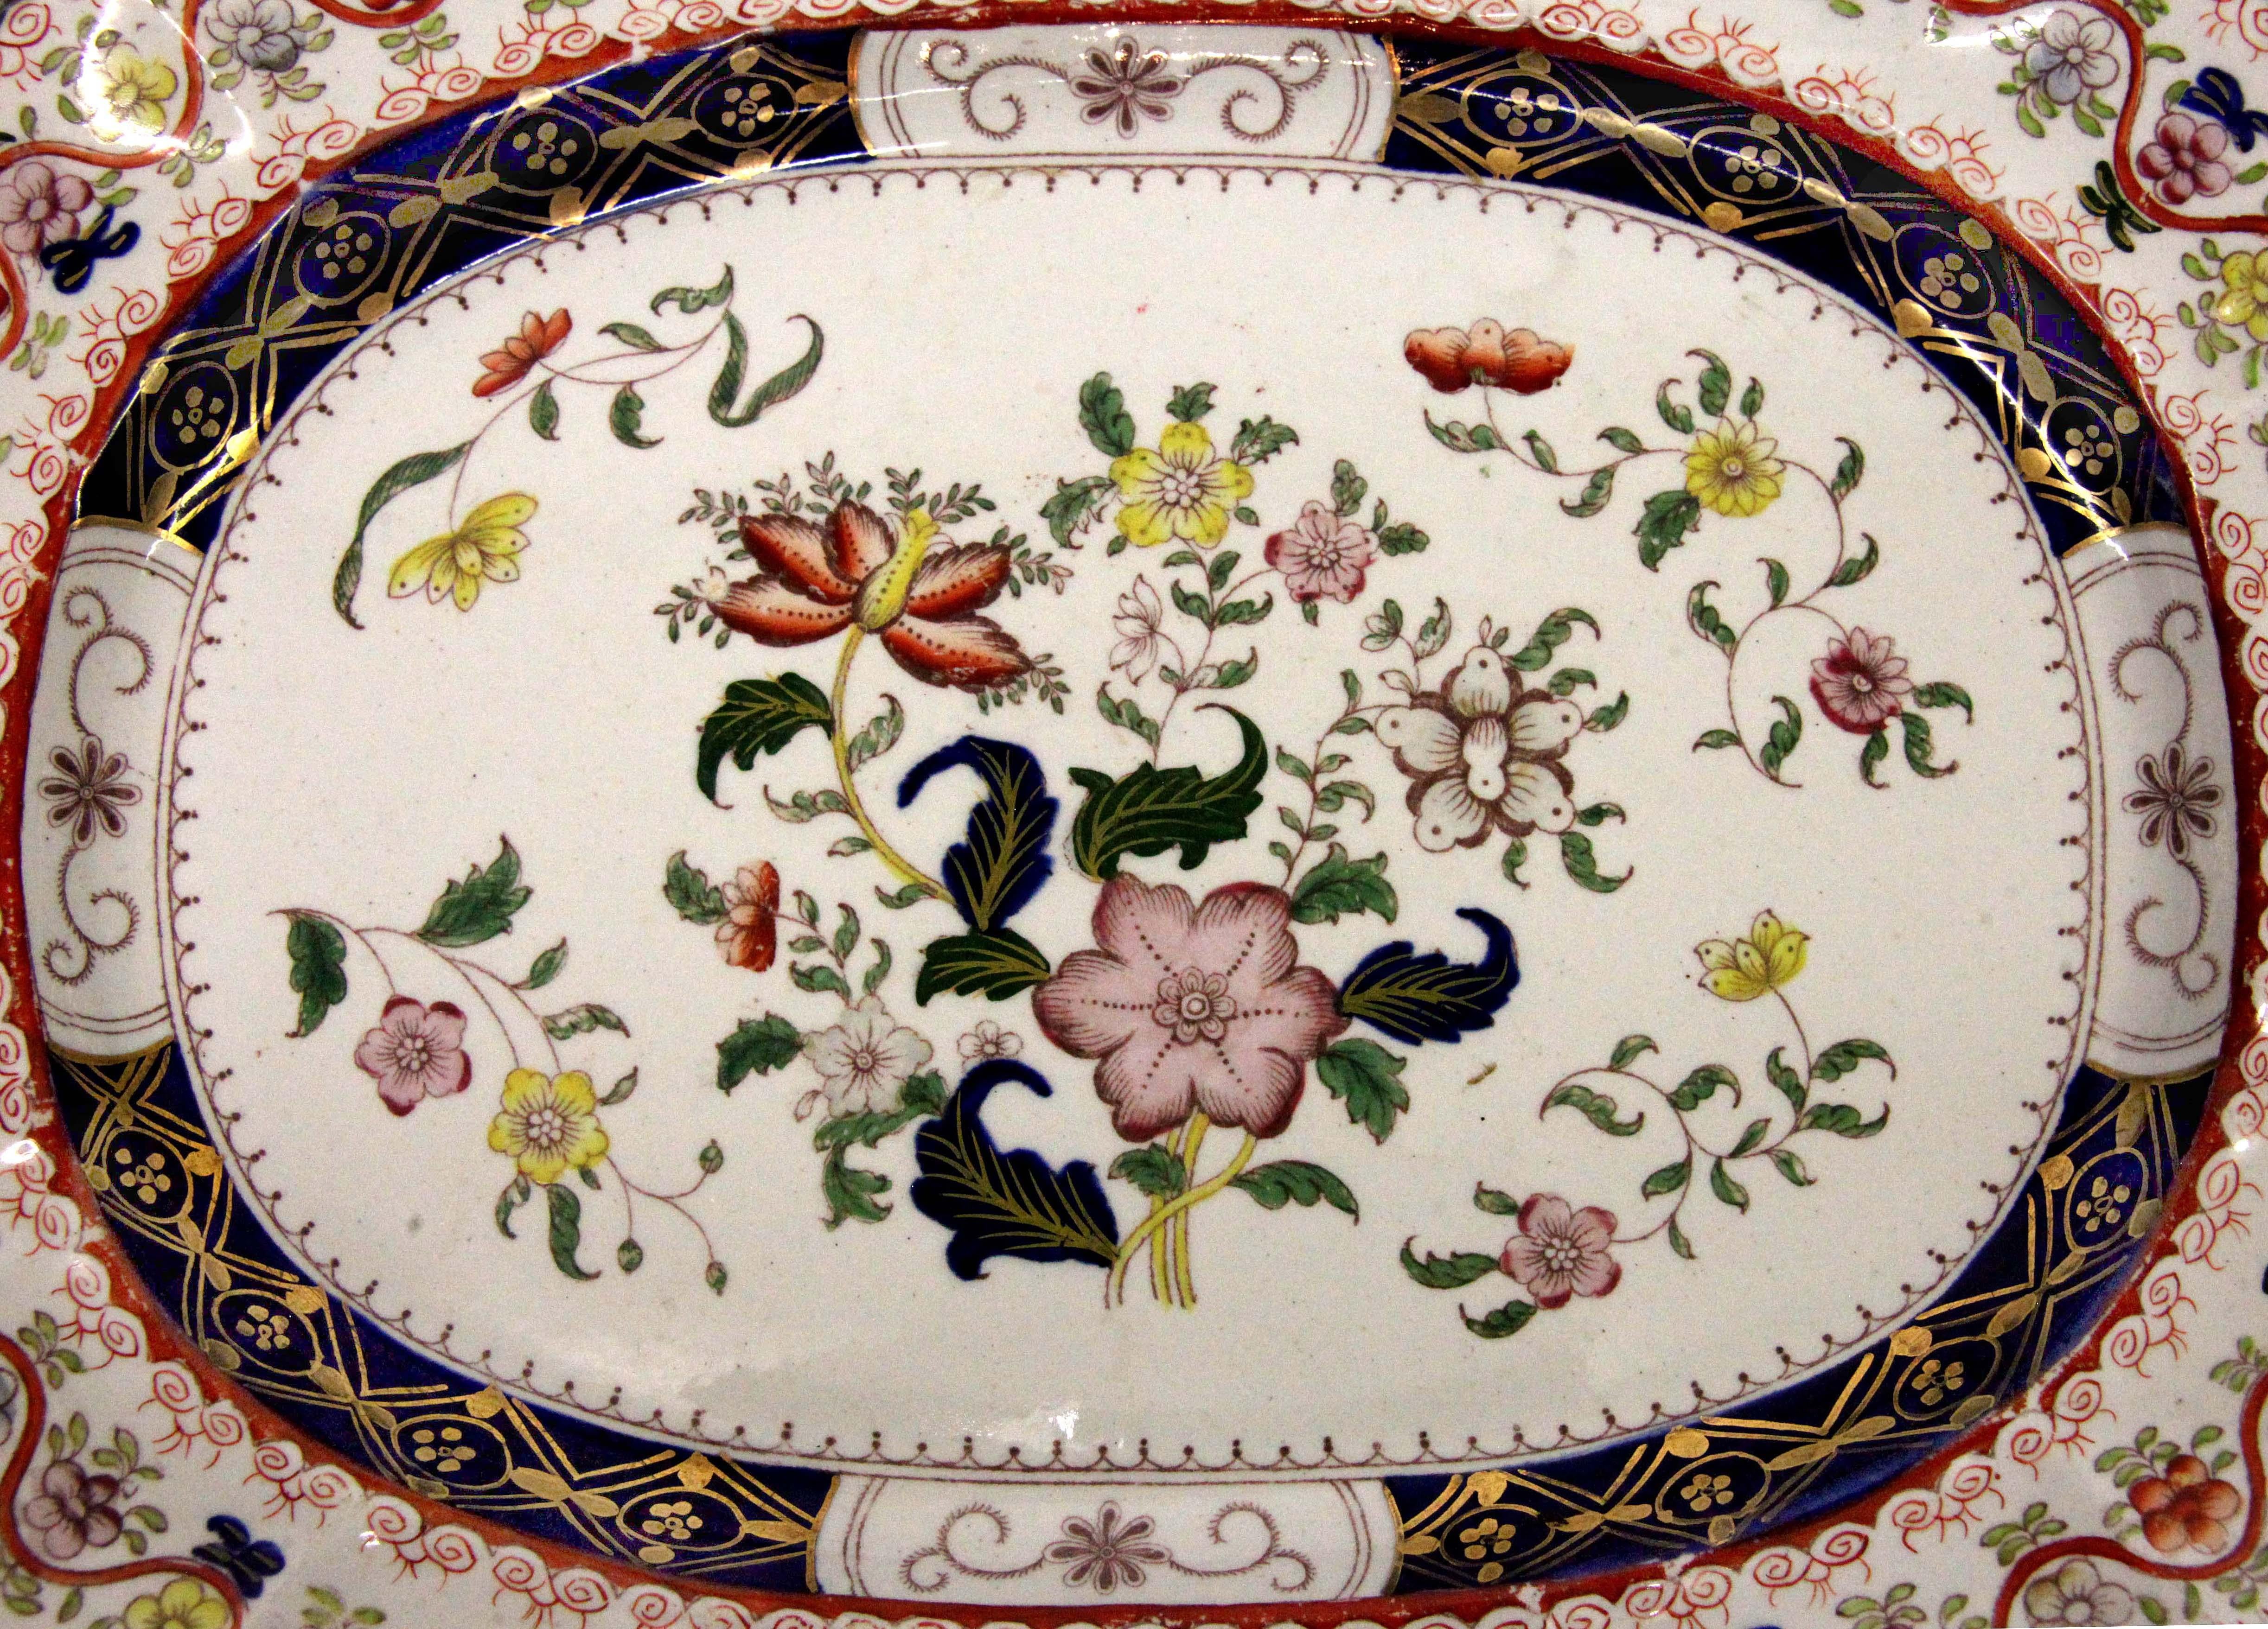 Early 19th century Mason's Ironstone platter, the polychrome floral border separated by serpentine line, the interior with leaf and floral design accentuated by gilding over cobalt. This mark is shown in Geoffrey Godden's Encyclopedia of British